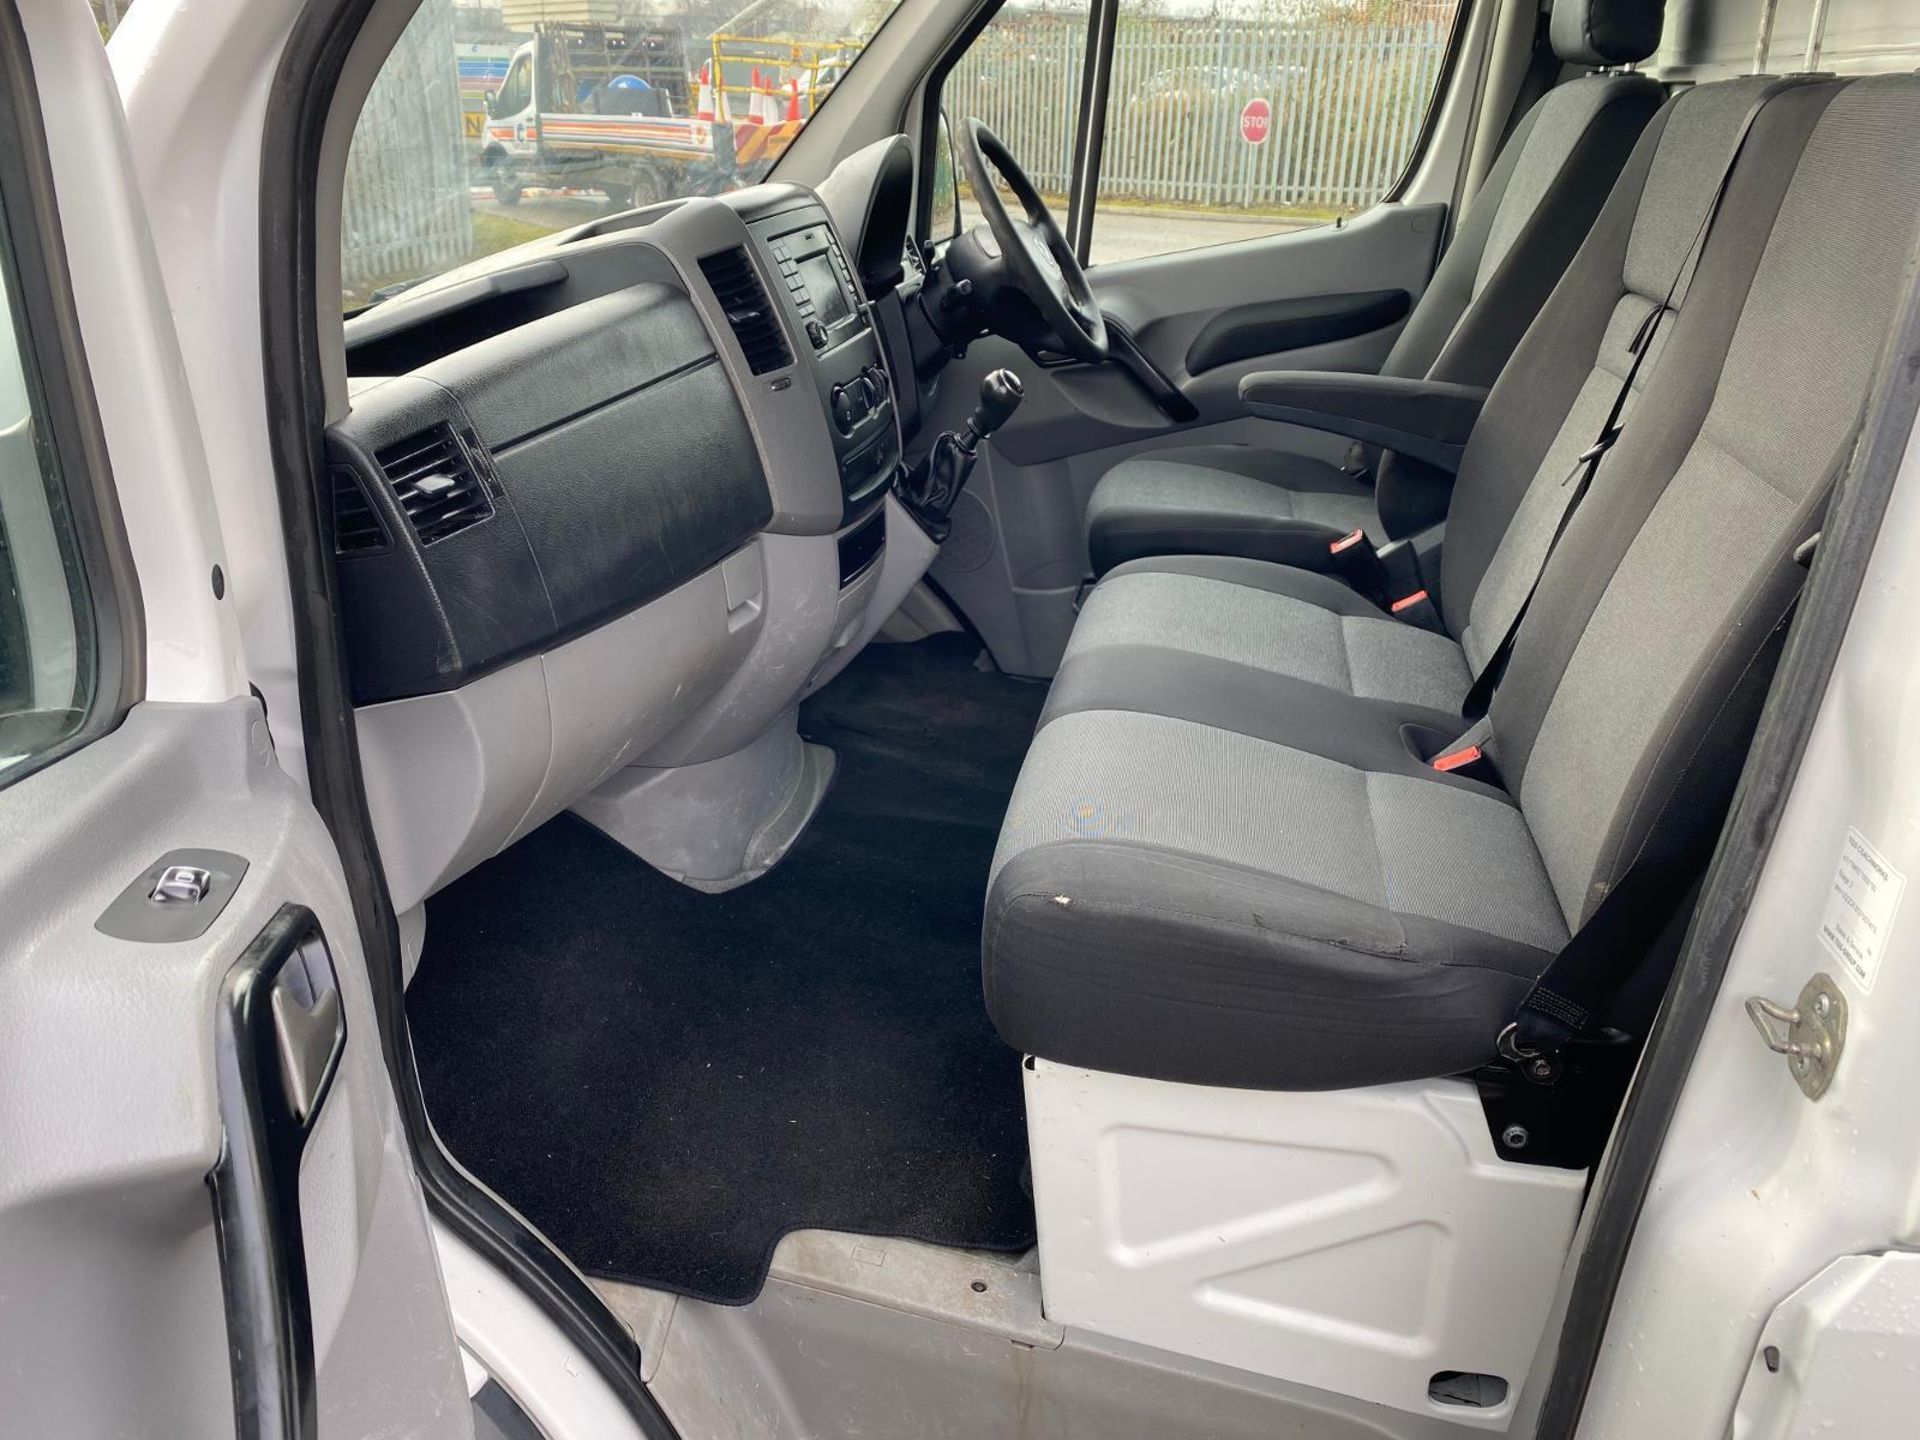 2016 VW CRAFTER: DROP DOWN CAGE TIPPER, MANUAL TRANSMISSION - Image 13 of 13